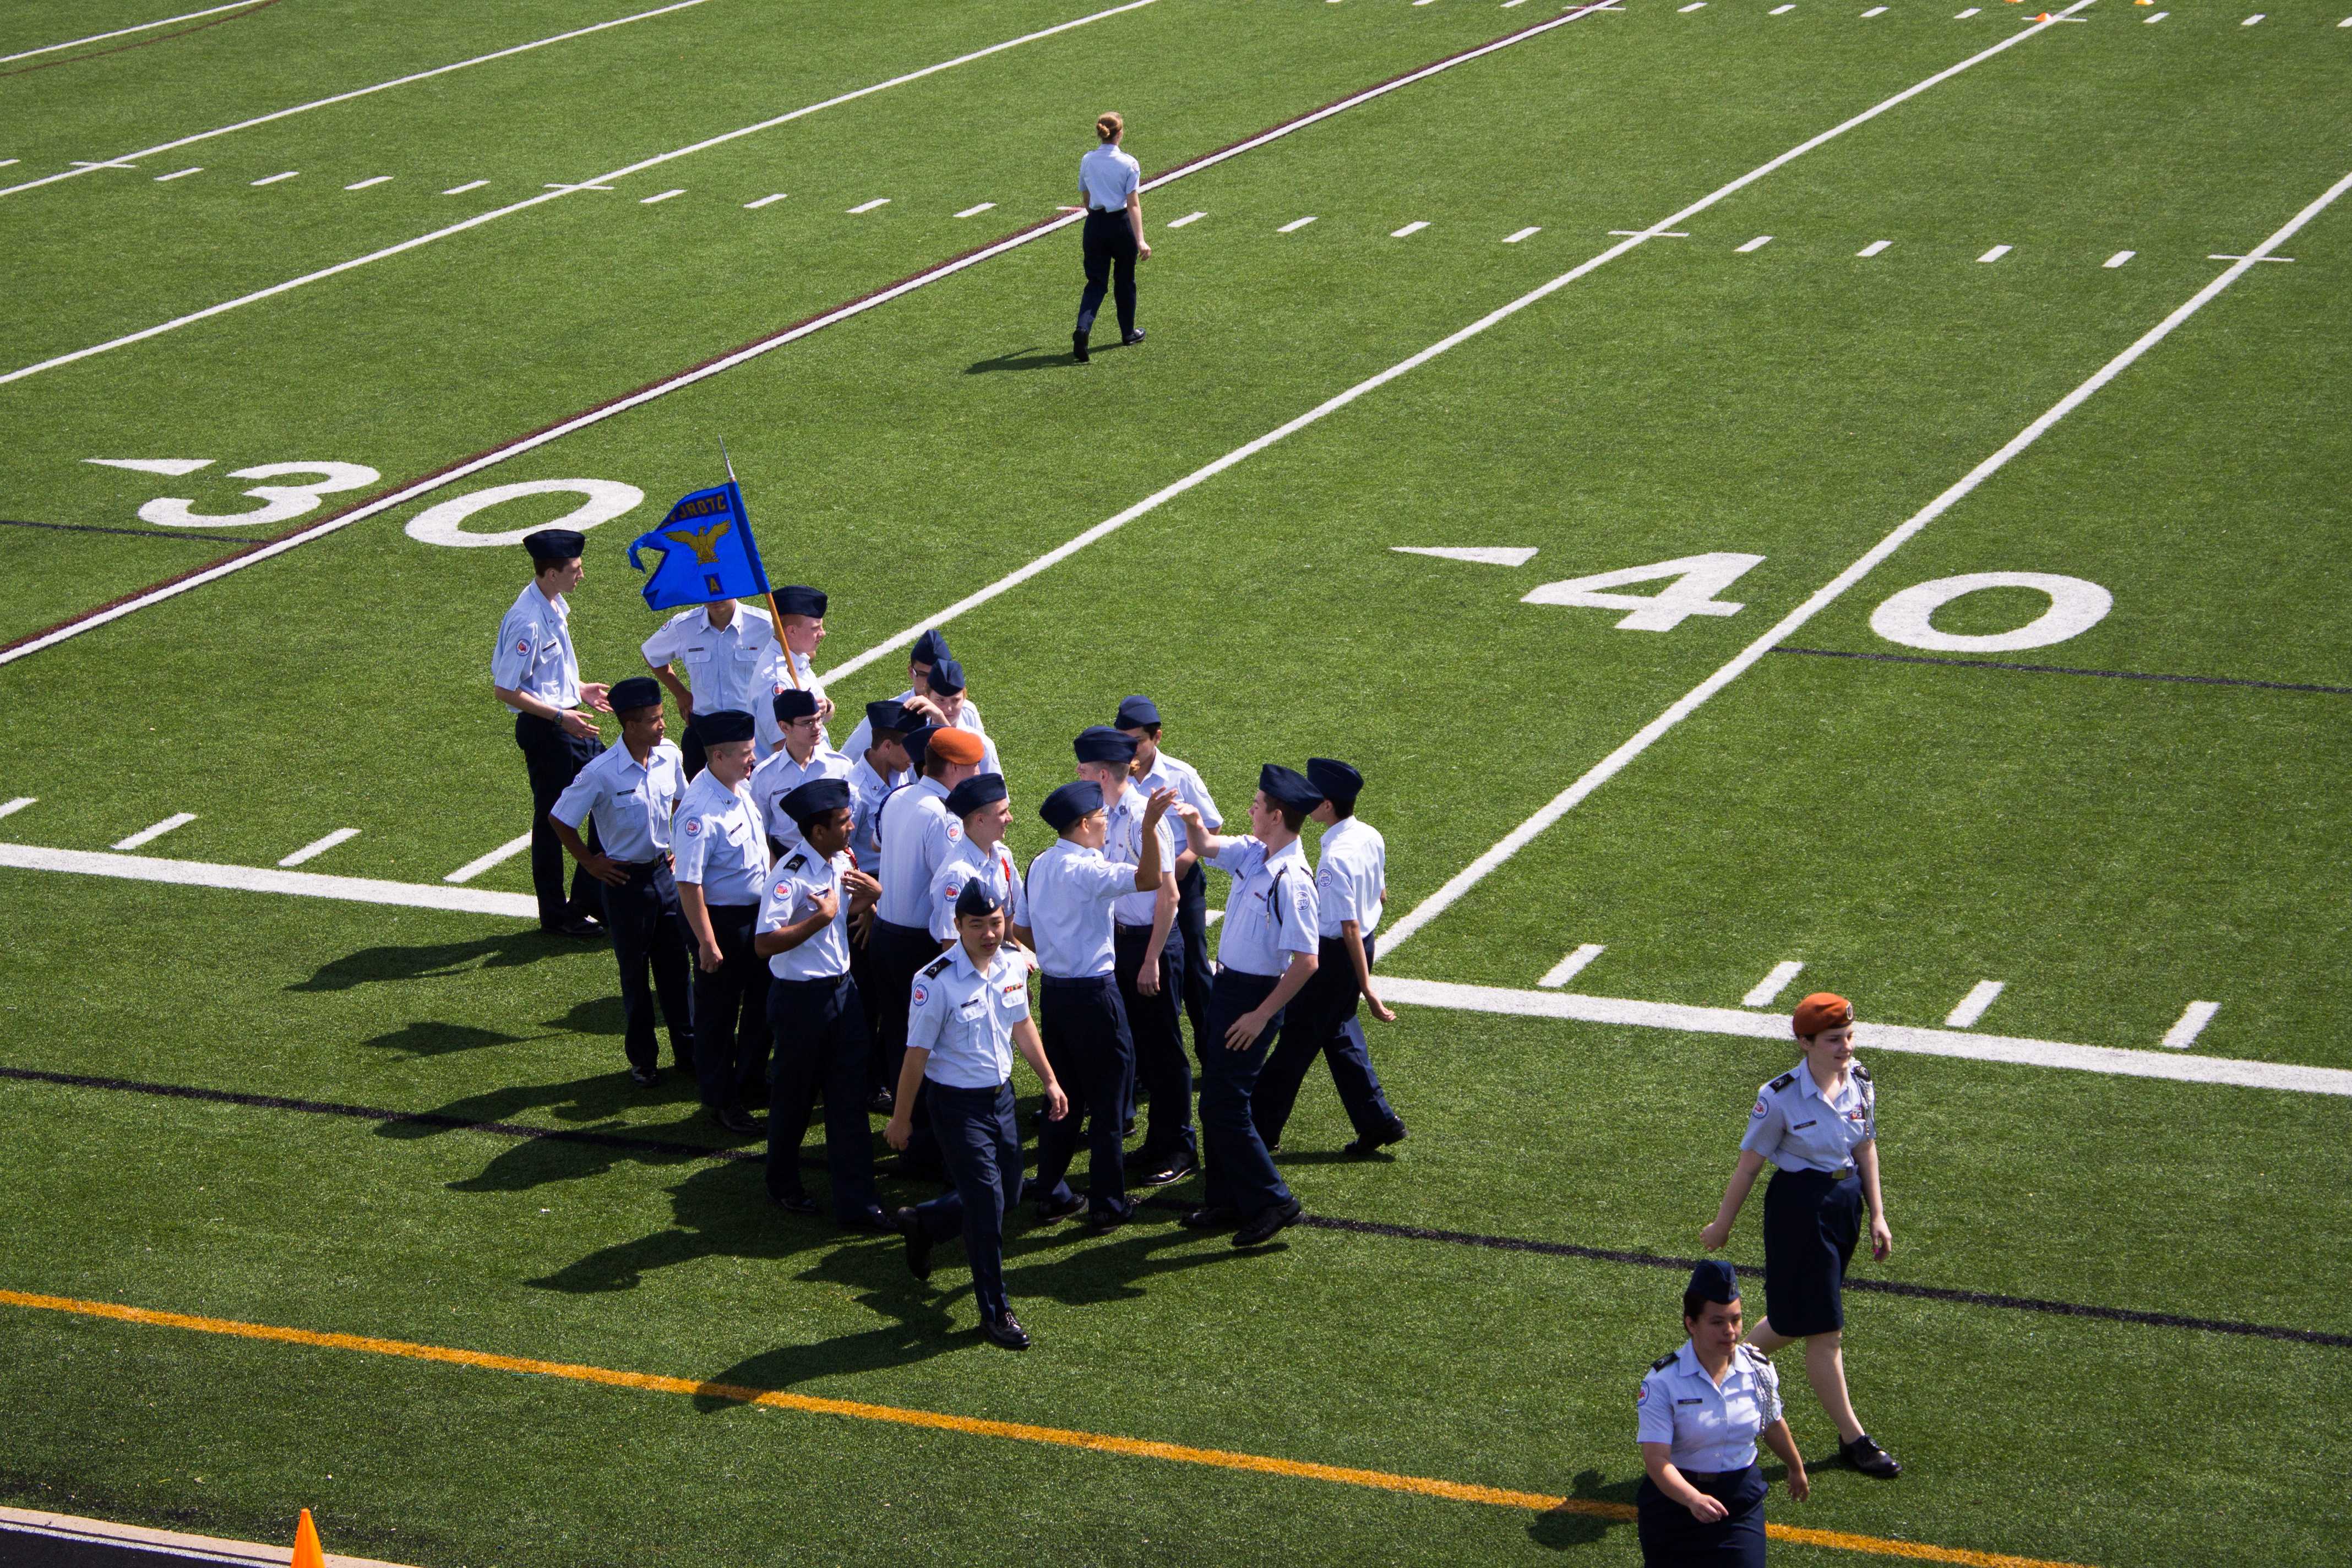 ROTC+Cadets+Show+Off+Skills+At+Interflight+Competition